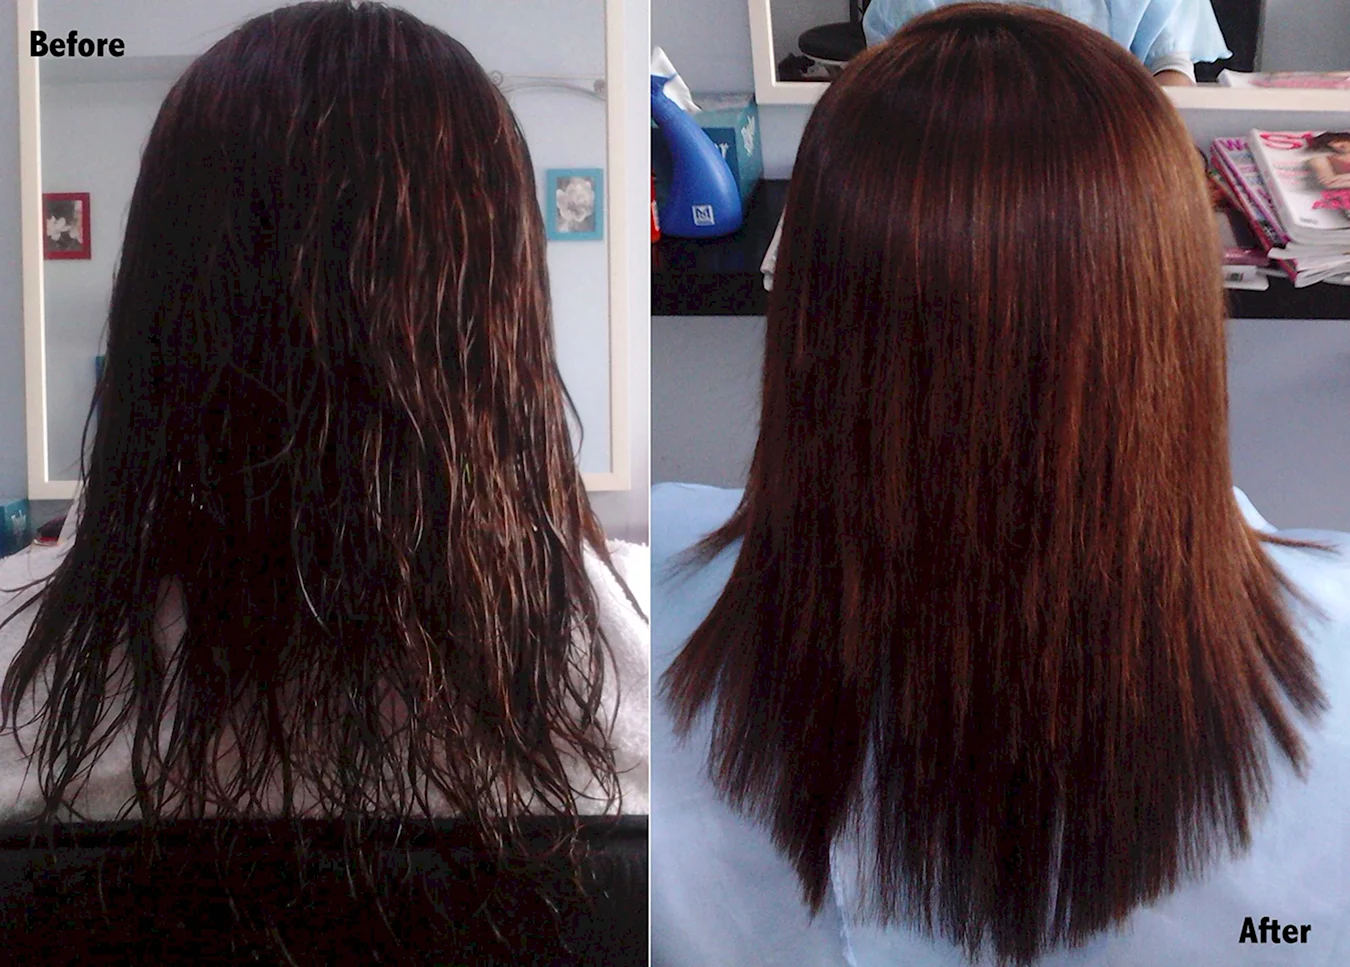 Hair Straightening before and after